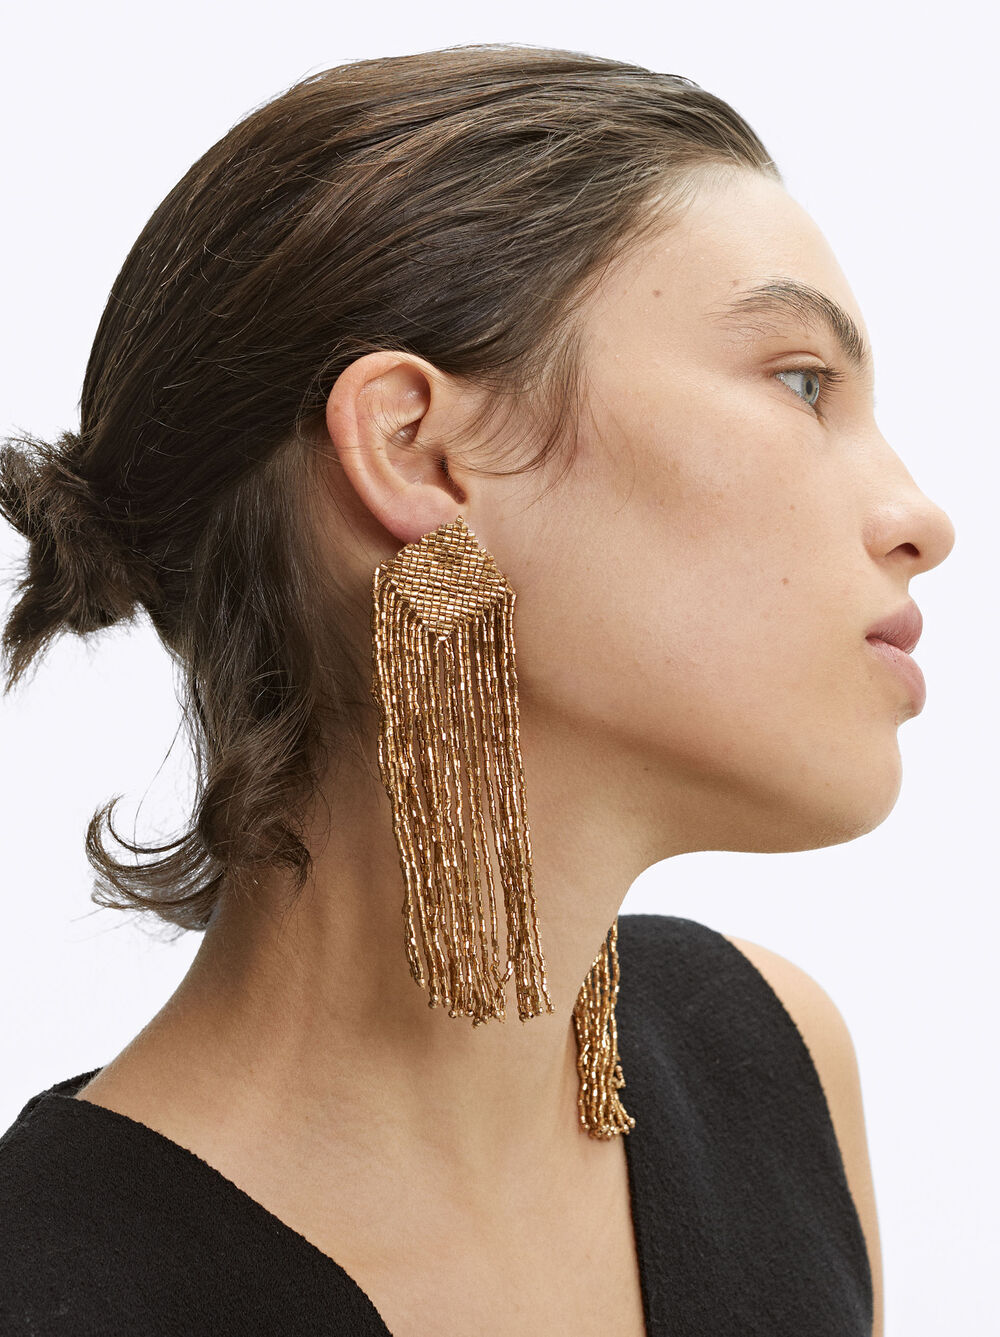 Golden Earrings With Beads